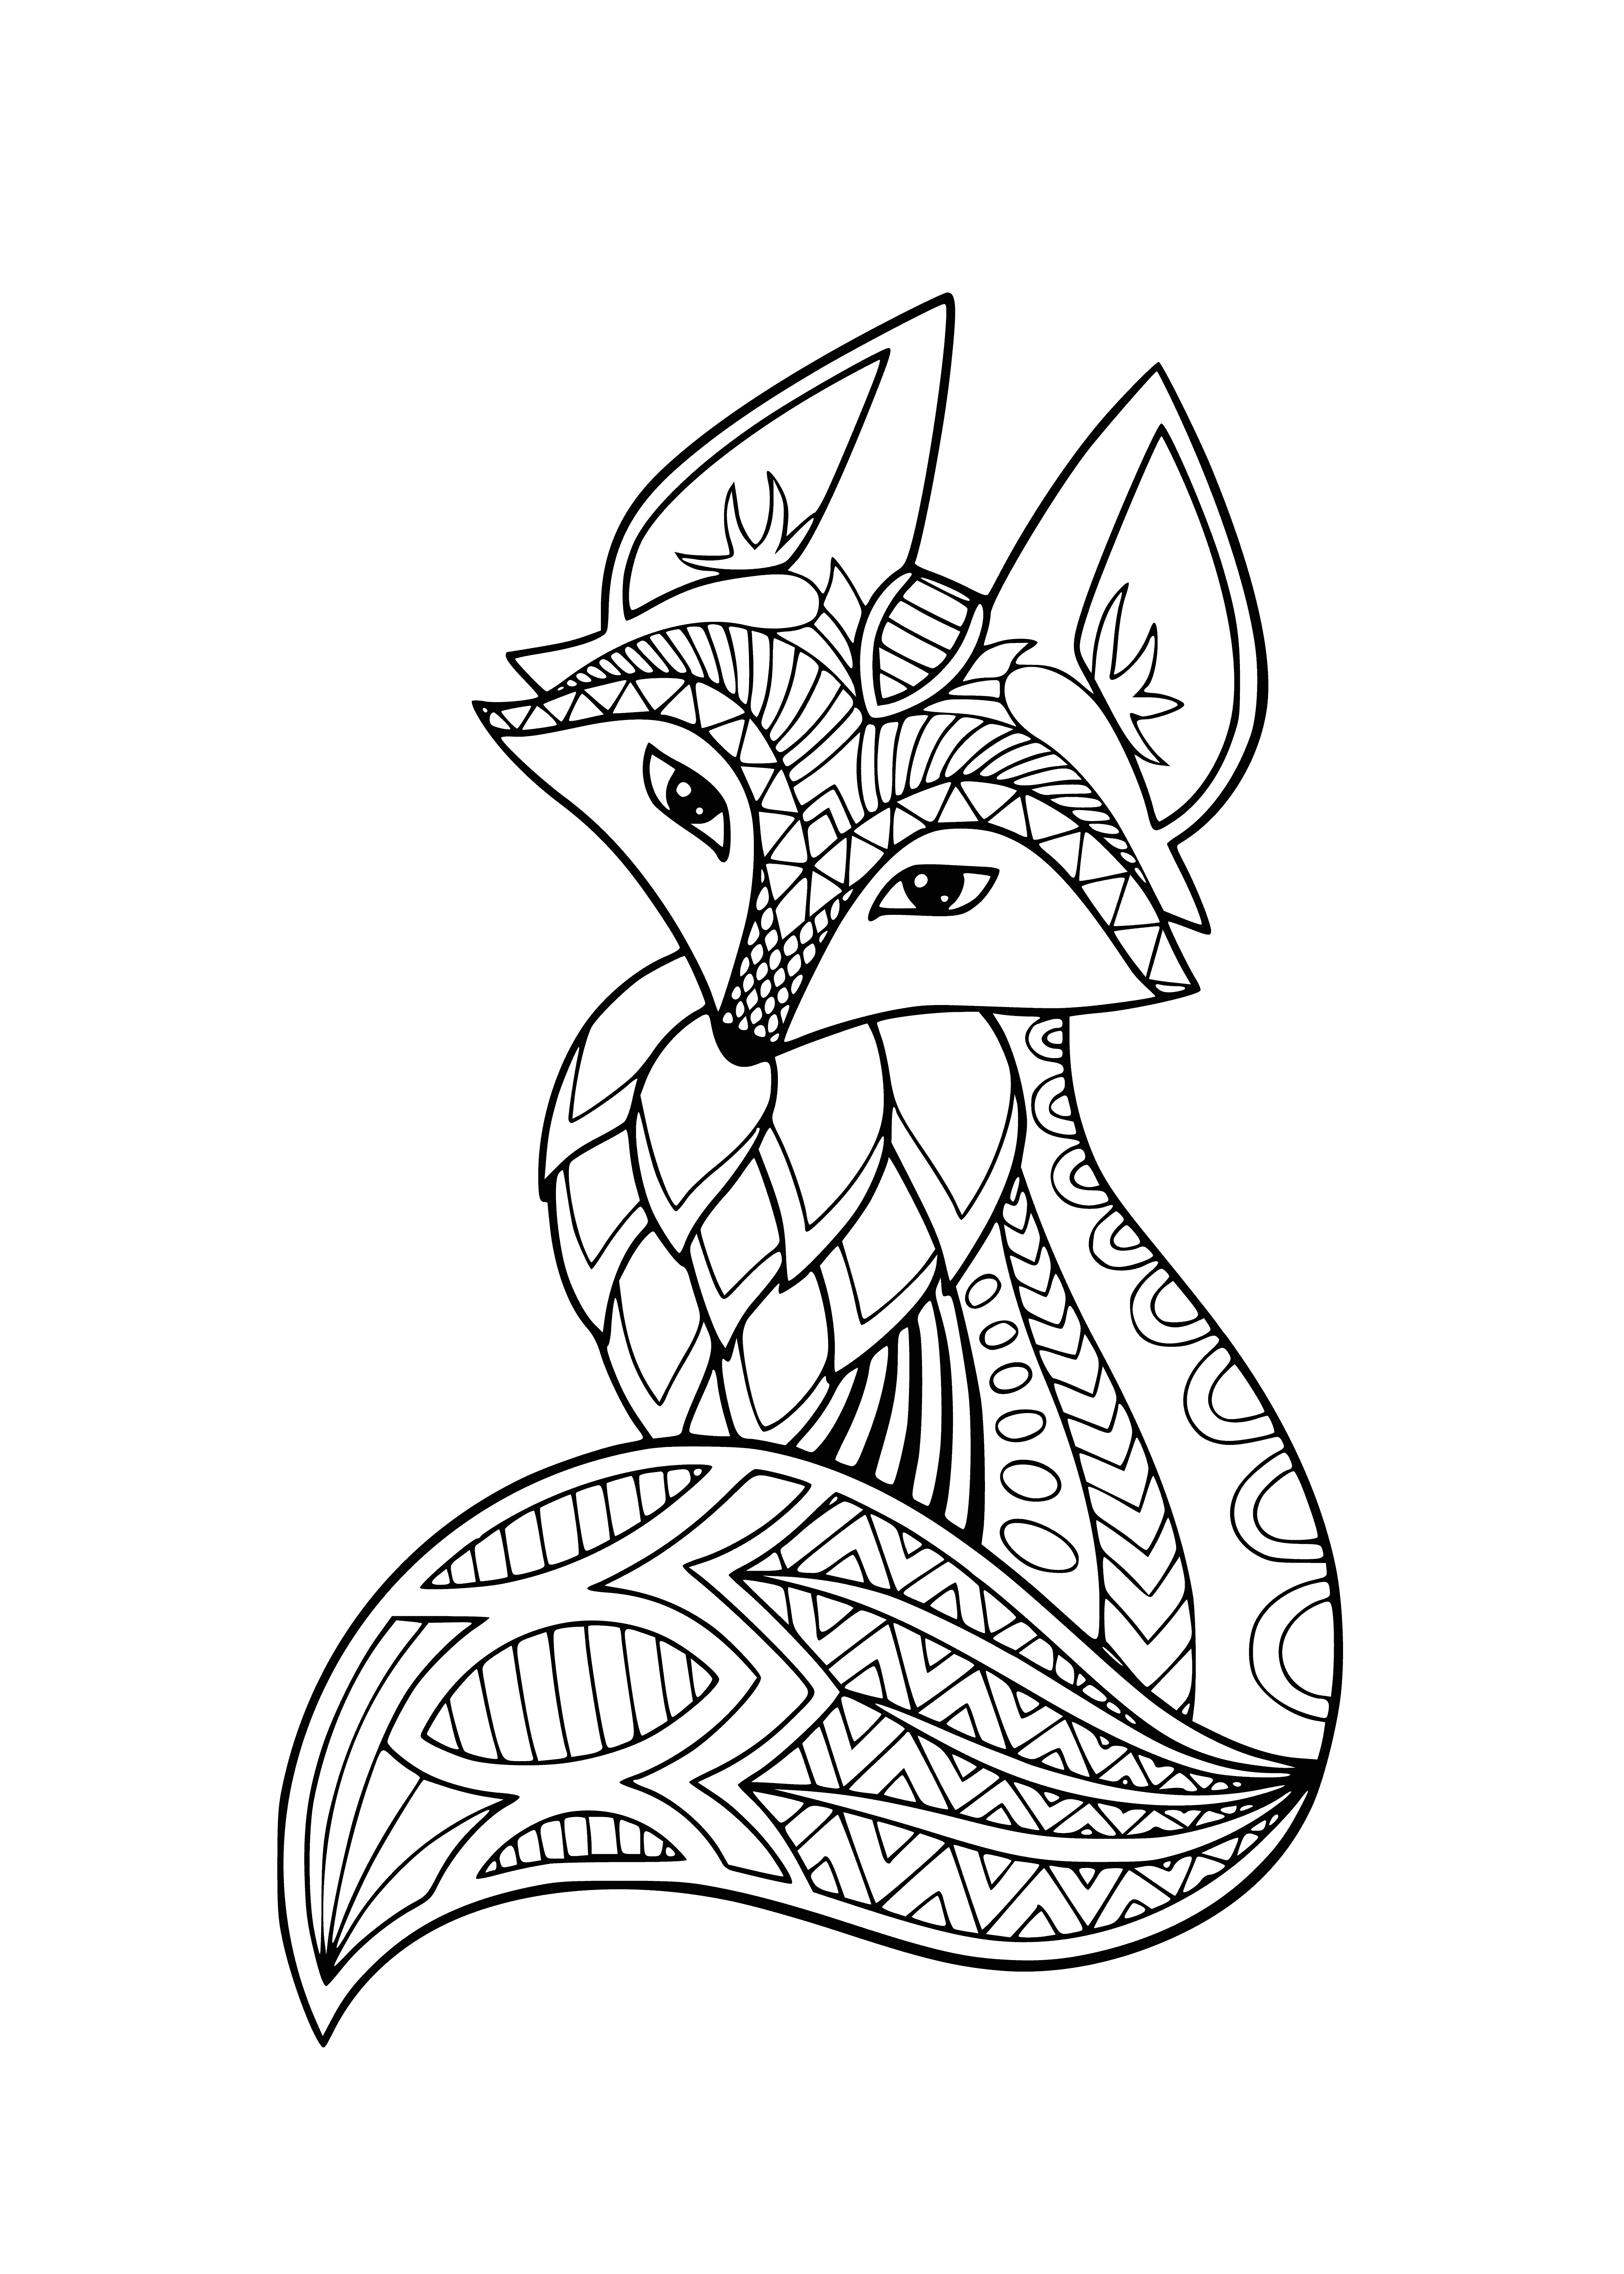 coloring page: The fox has a sweet variety of colorings, including brown, white, black and green.